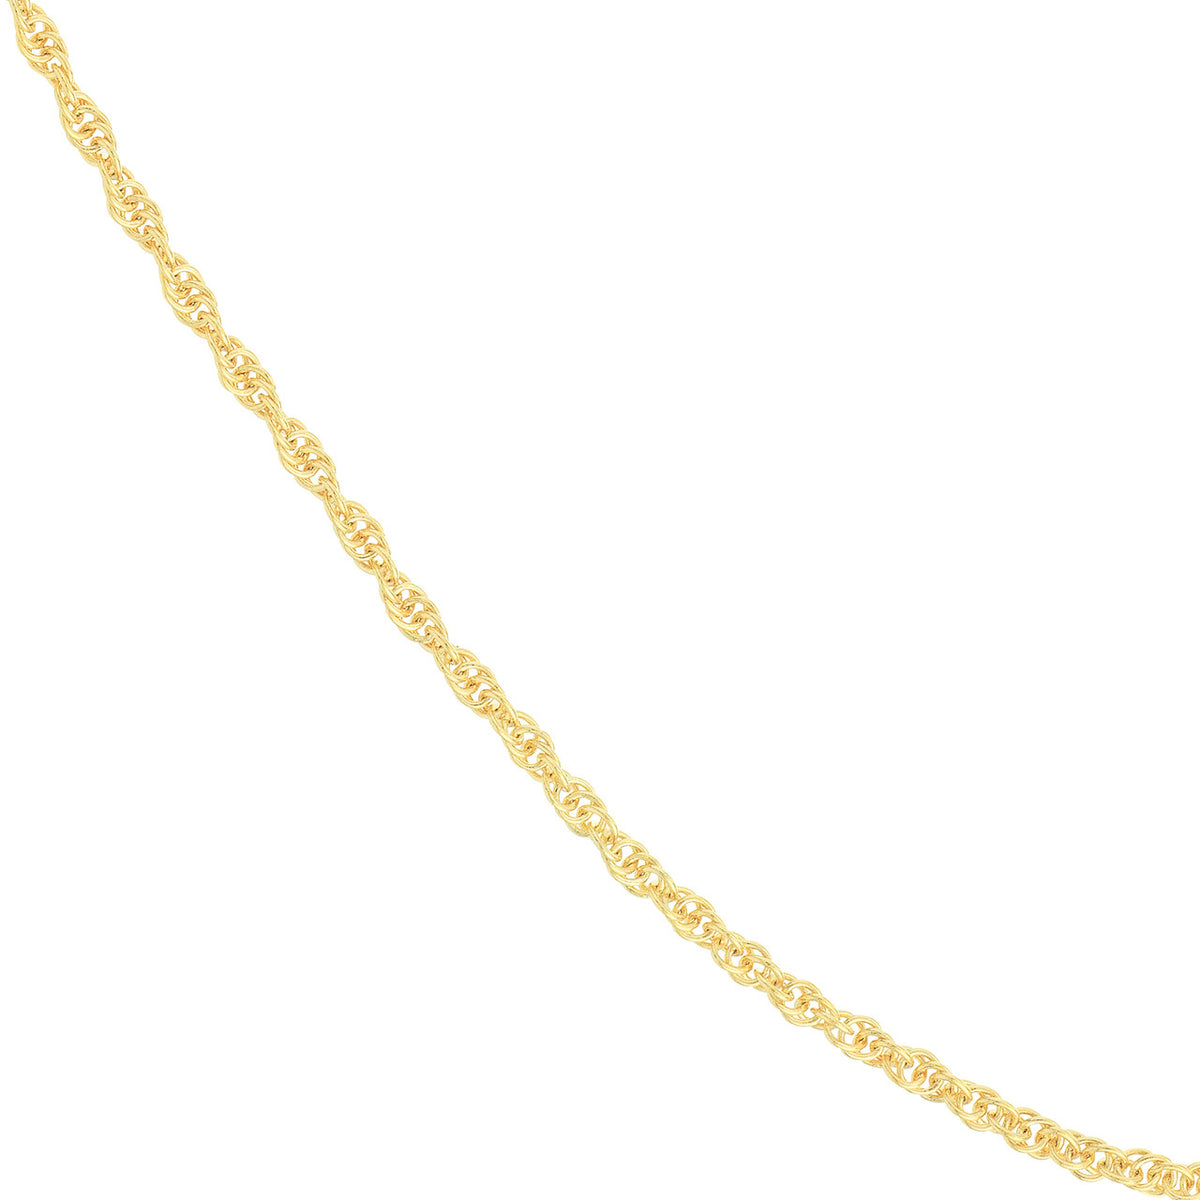 14K Yellow Gold or White Gold 1.40mm Adjustable Double Rope Chain Necklace